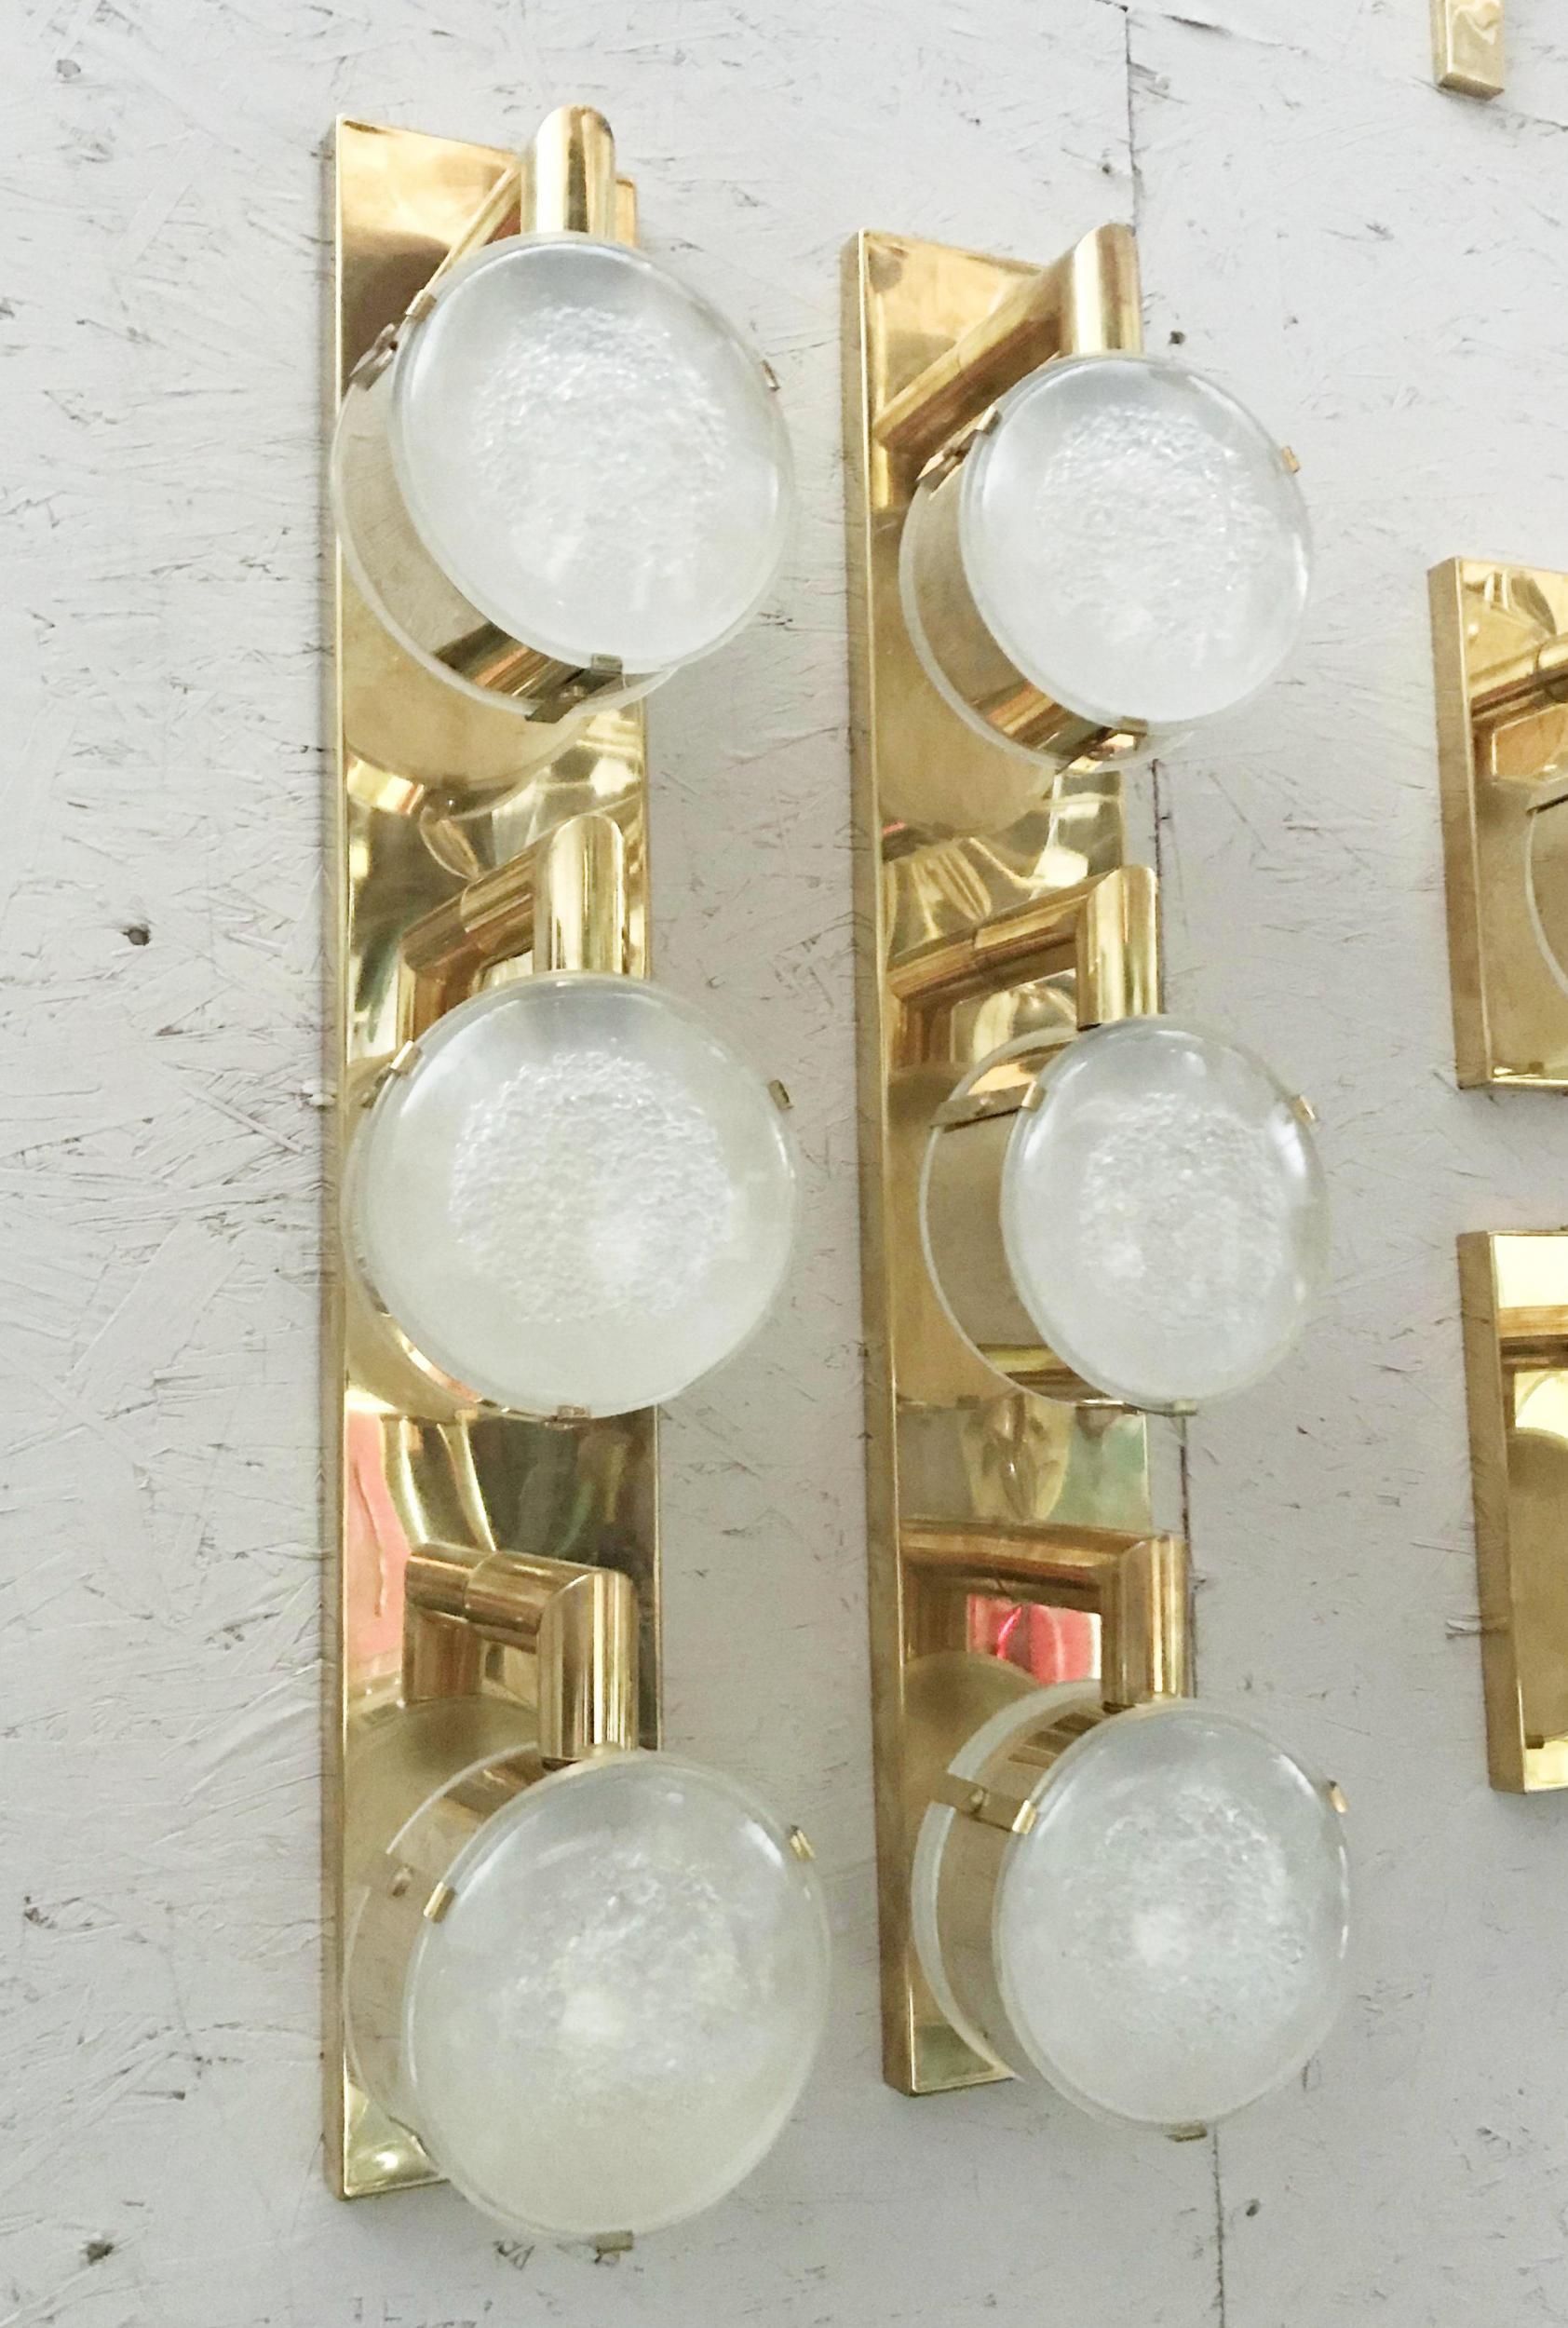 Limited edition pair of murano frosted glass sconces, c 1990s.